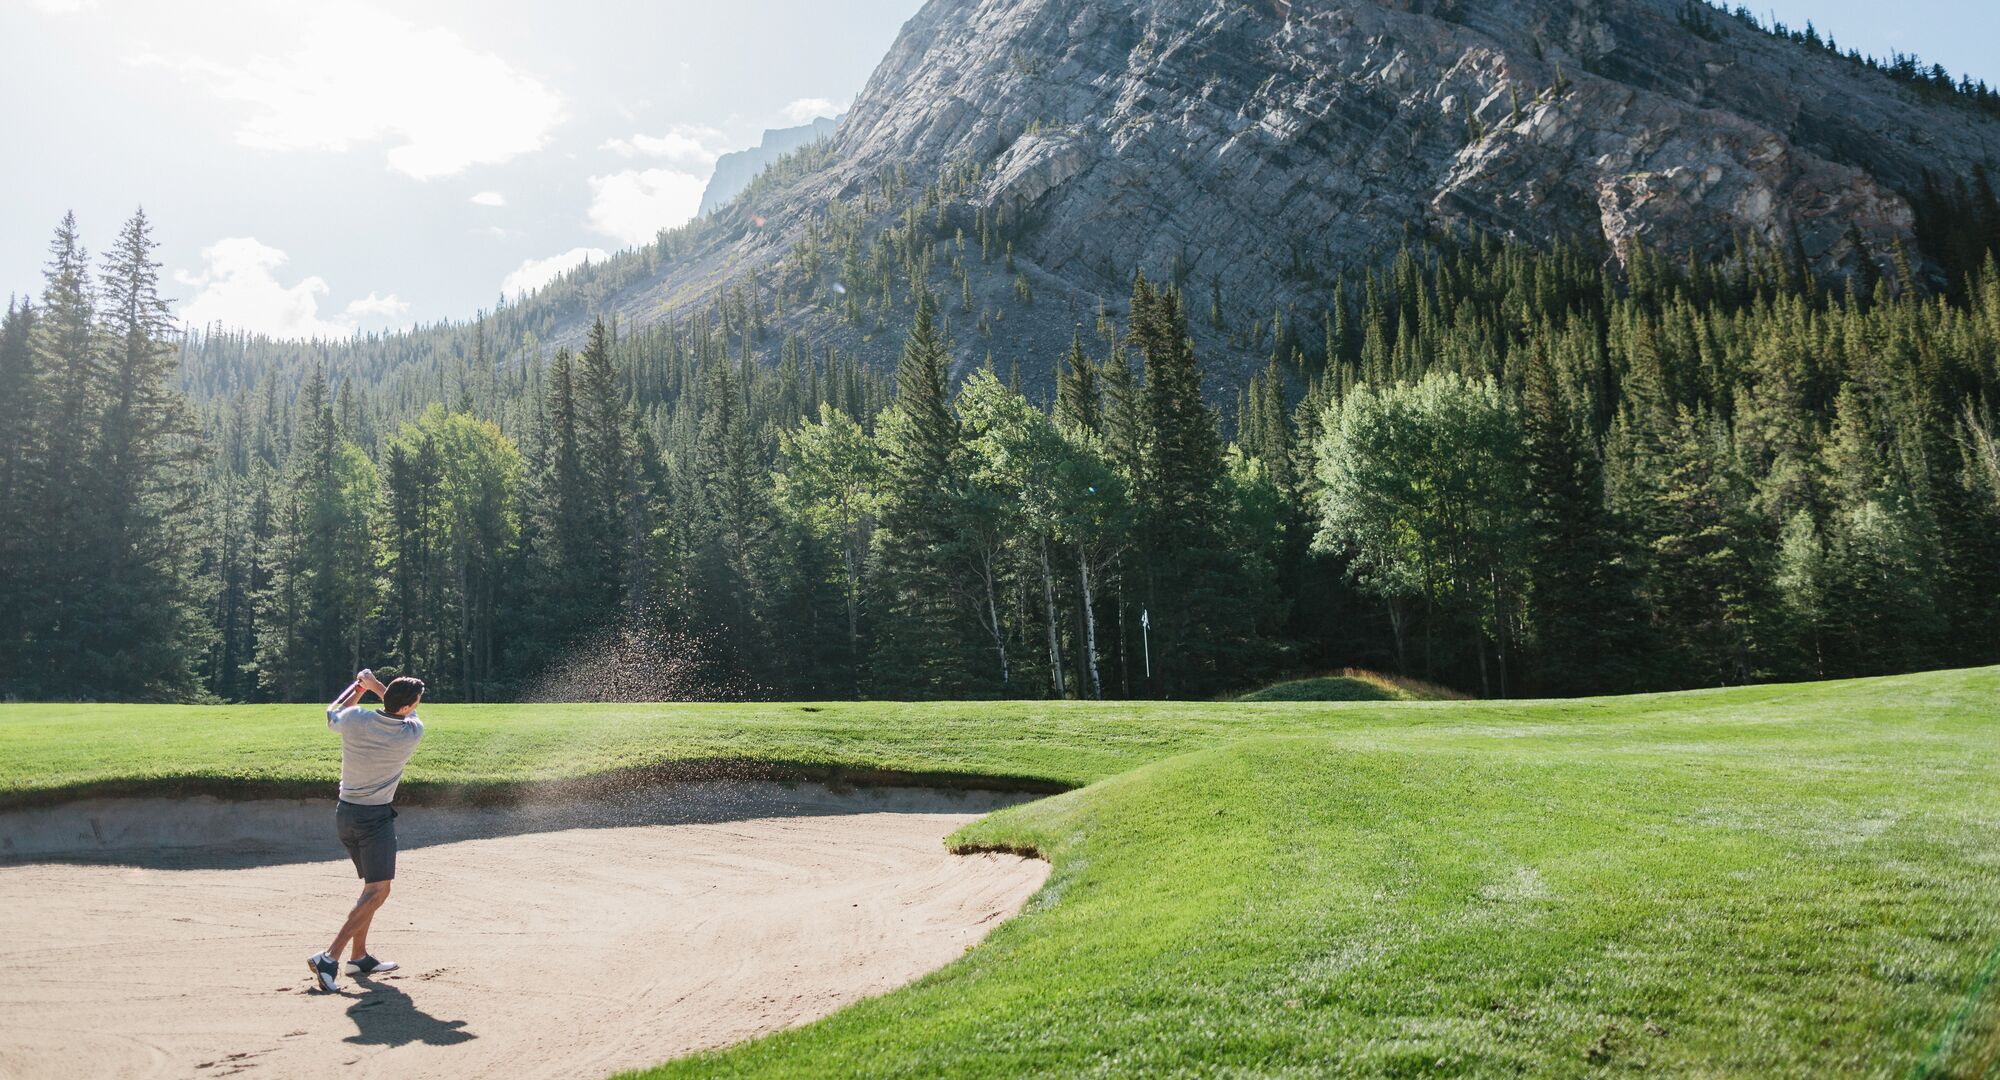 A golfer takes a swing from the sand pit at the Fairmont Banff Springs Golf Course in Banff National Park